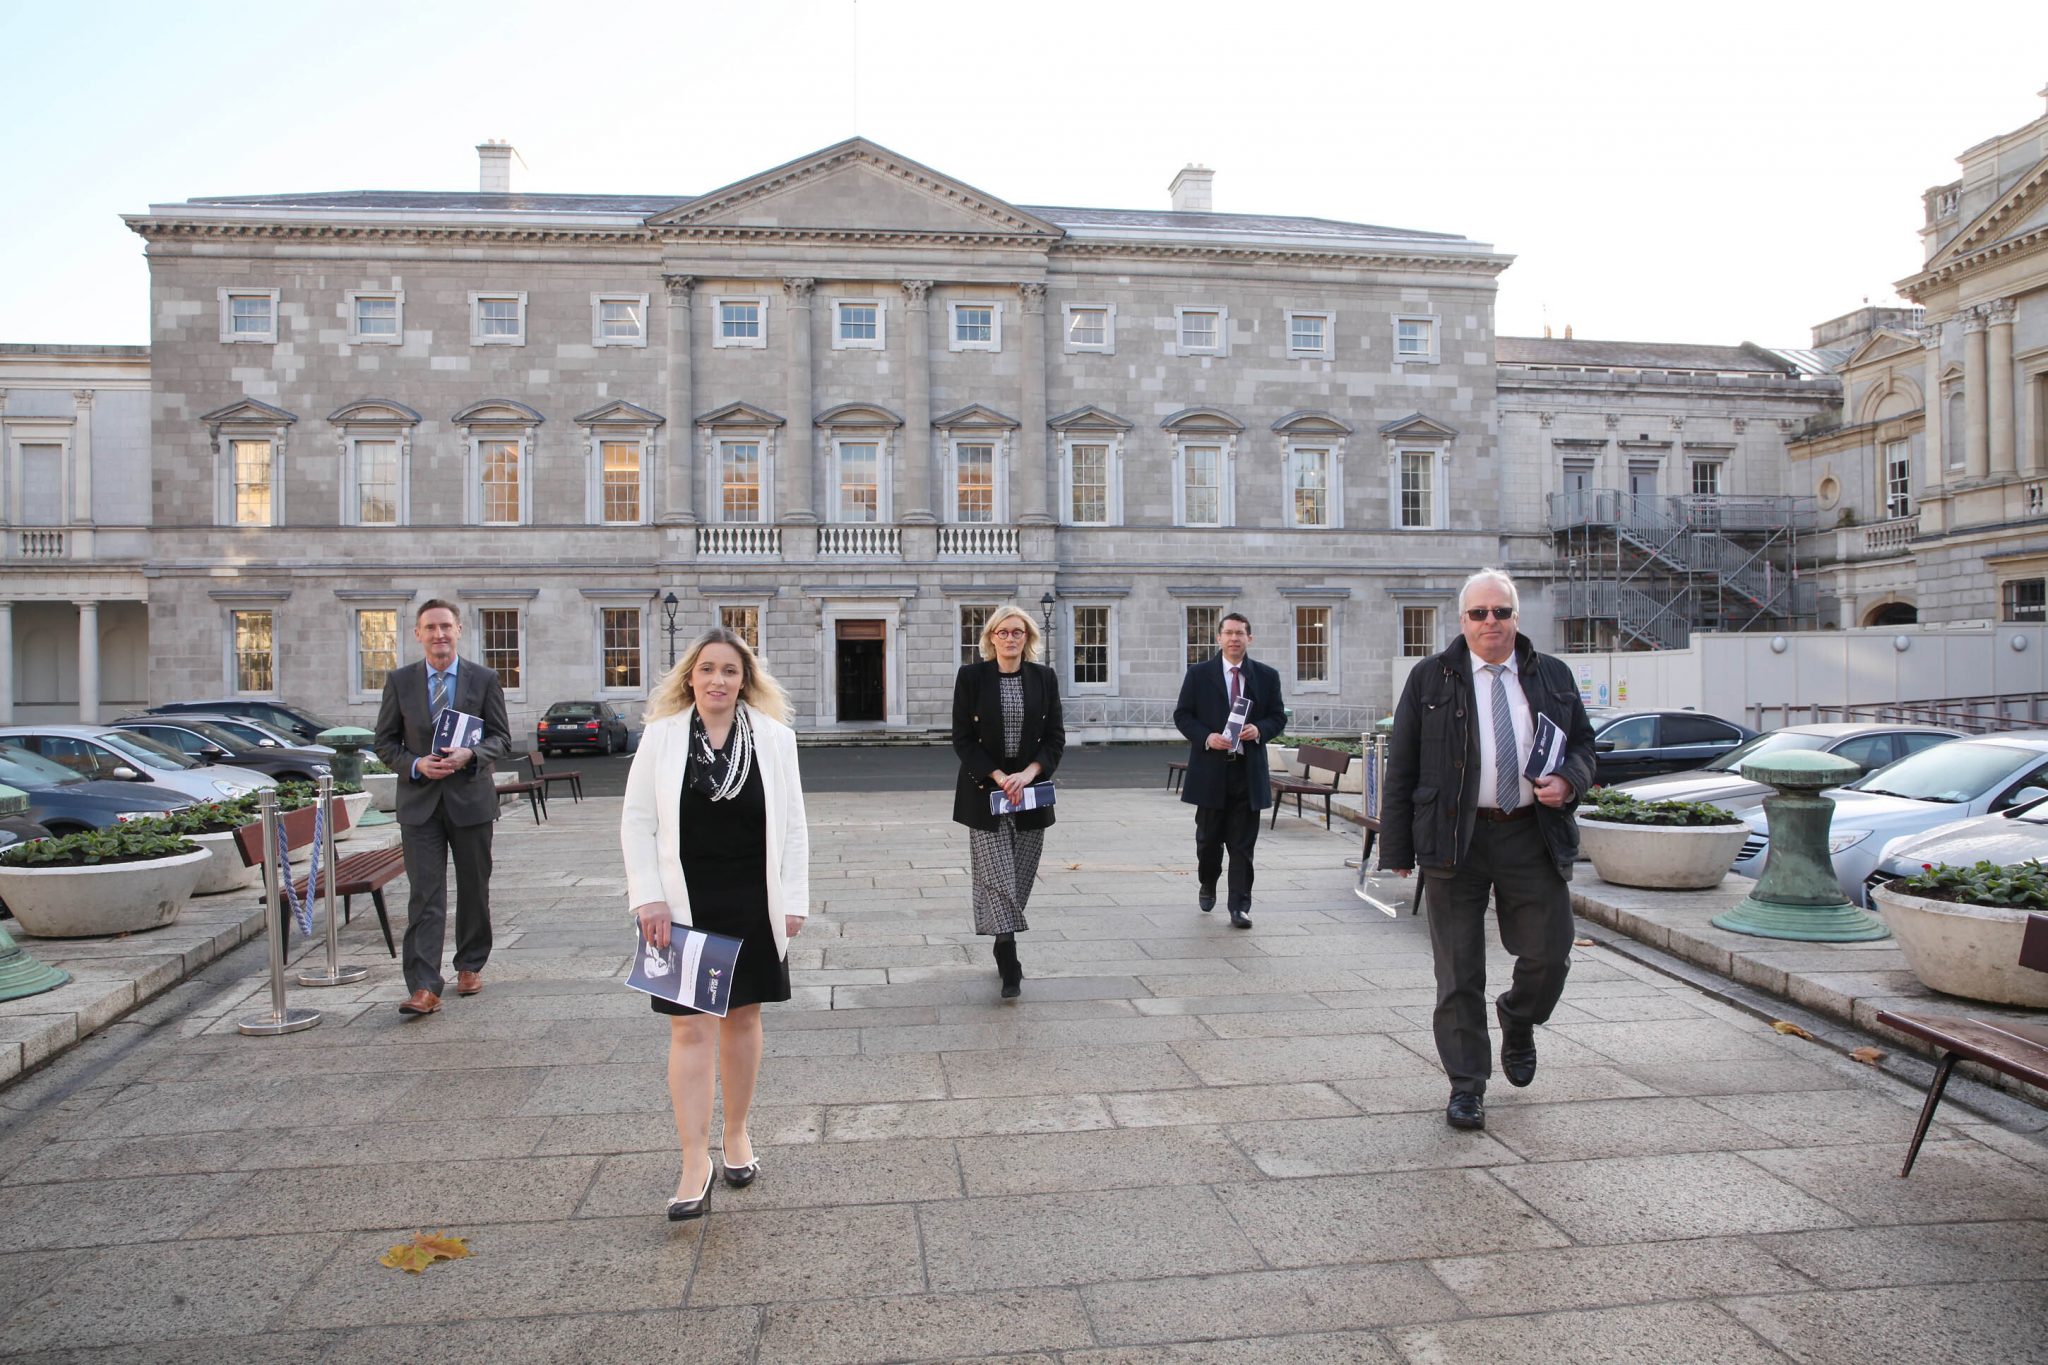 9.12.2021- Great news this afternoon! Foetal Pain Relief Bill to progress to Second Stage in Dáil next week